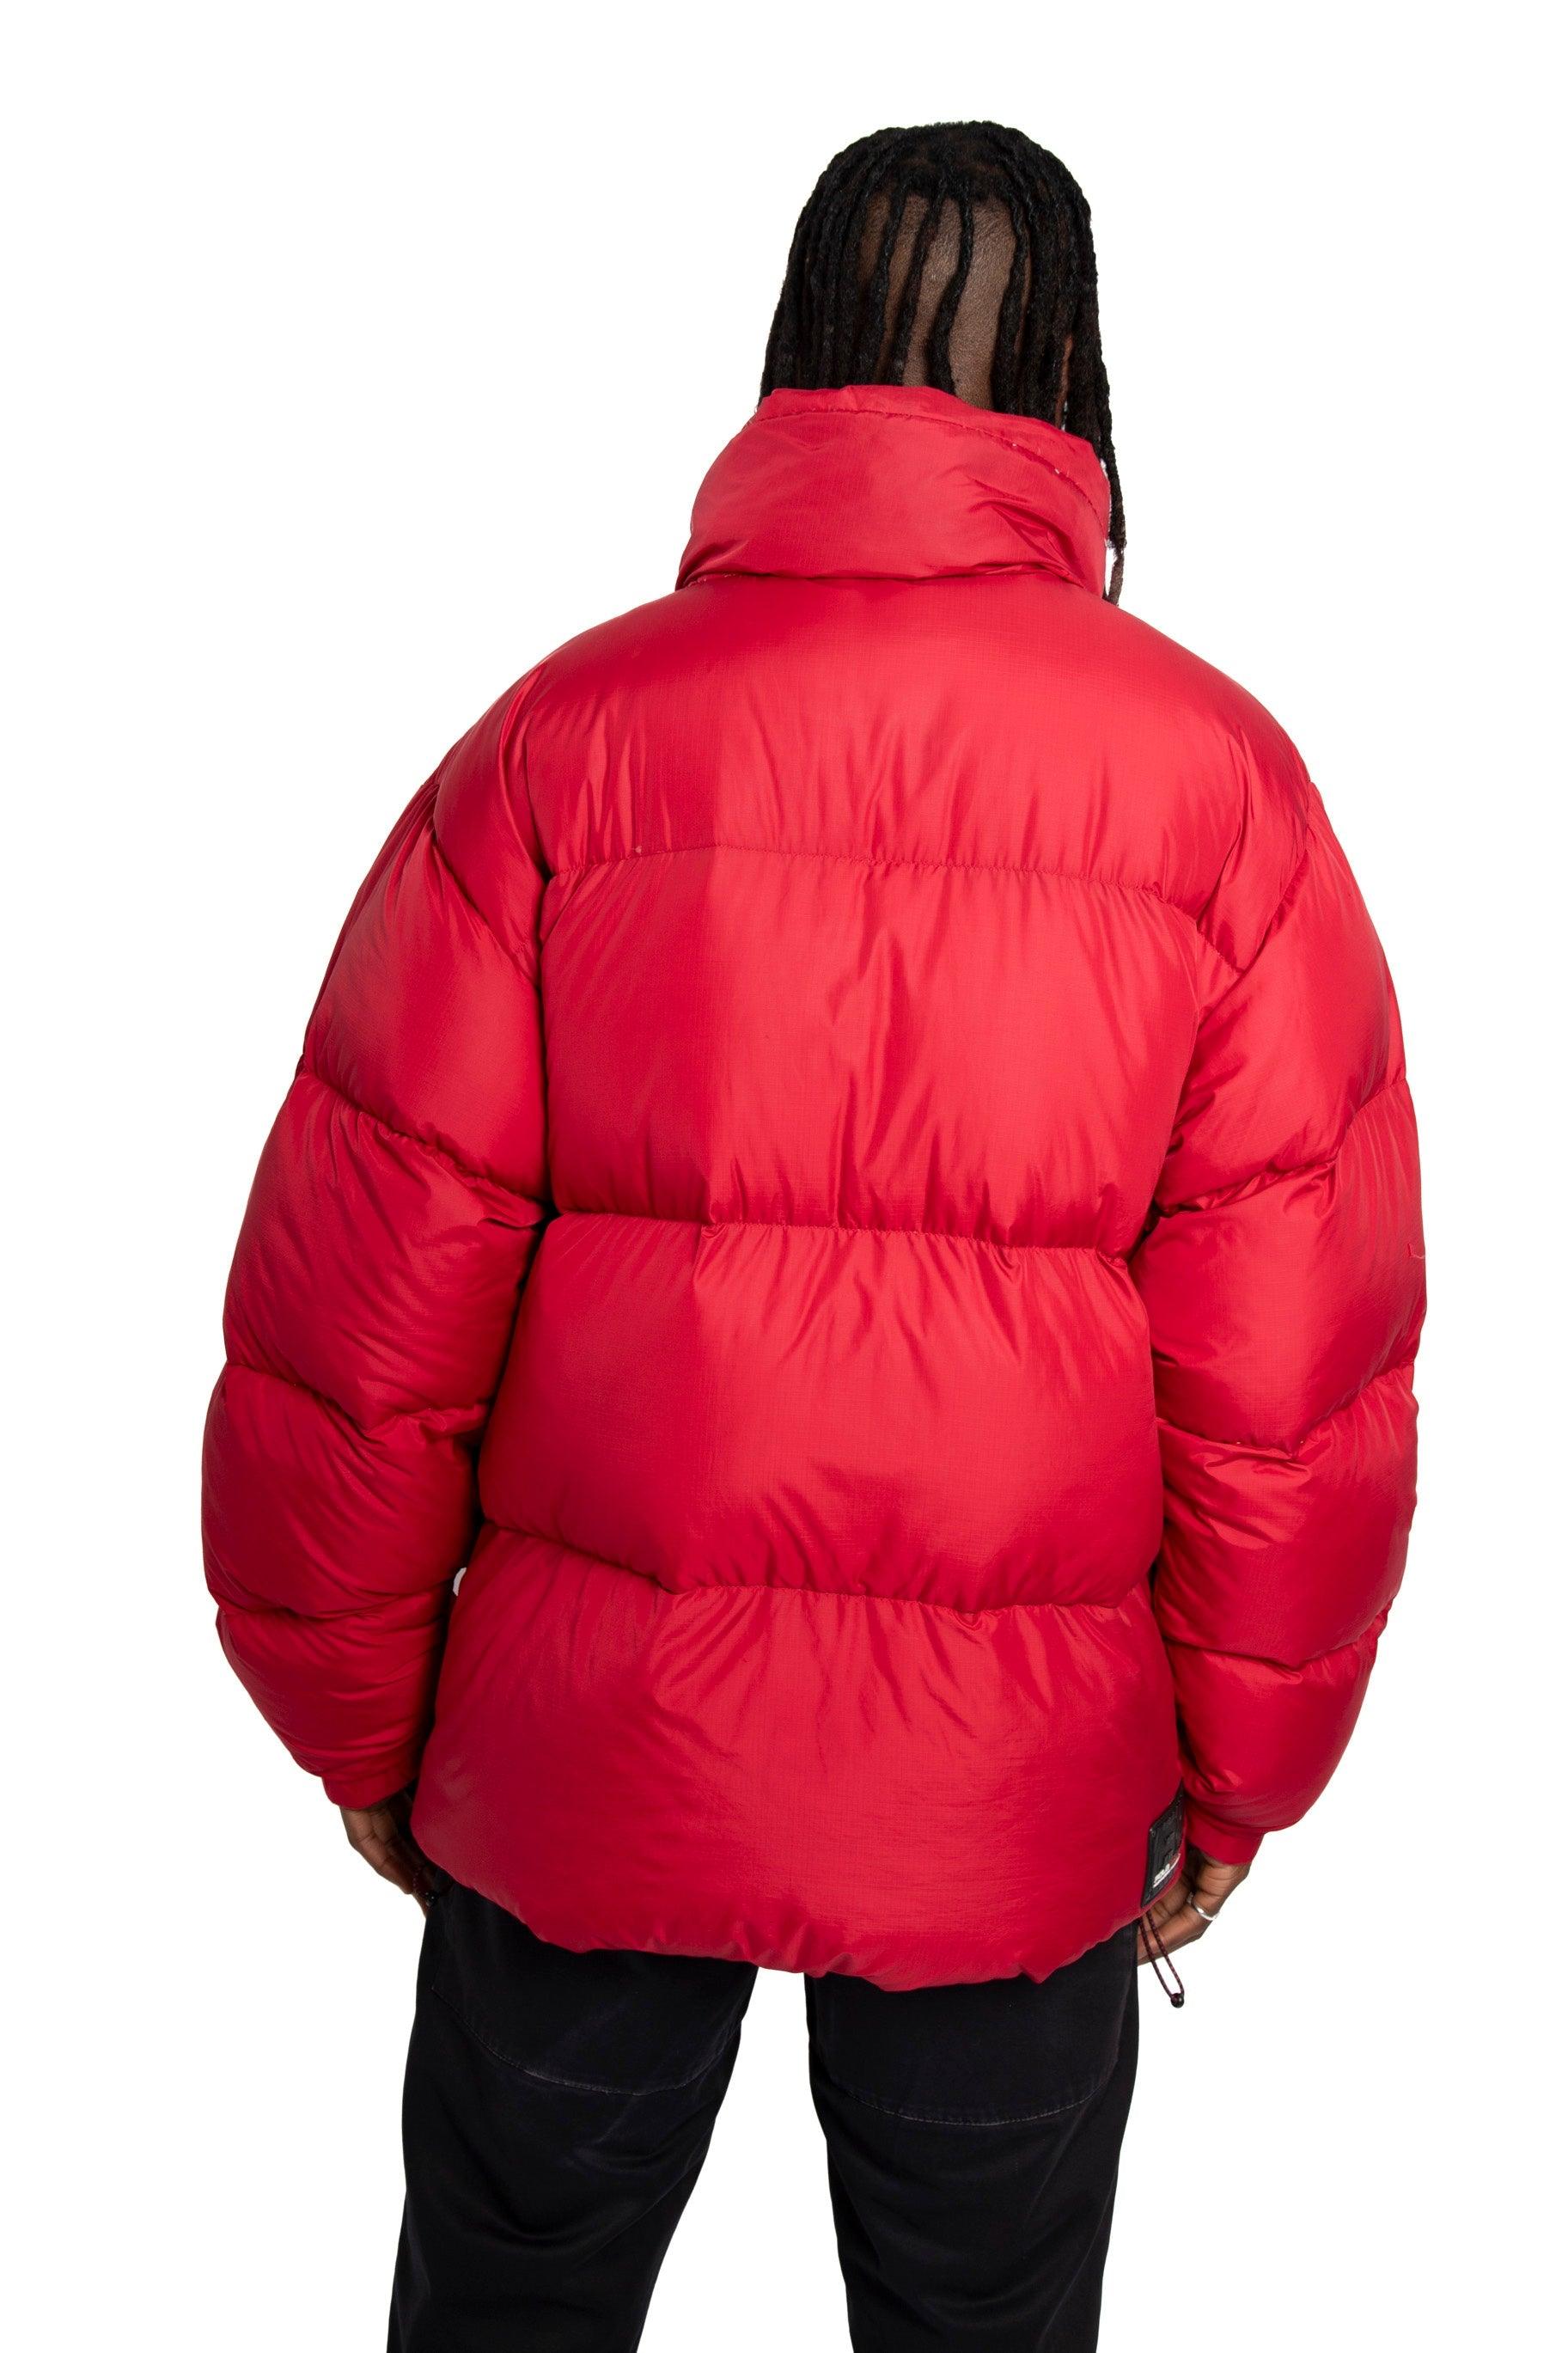 Polo Jeans Ralph Lauren Puffer Jacket - Known Source